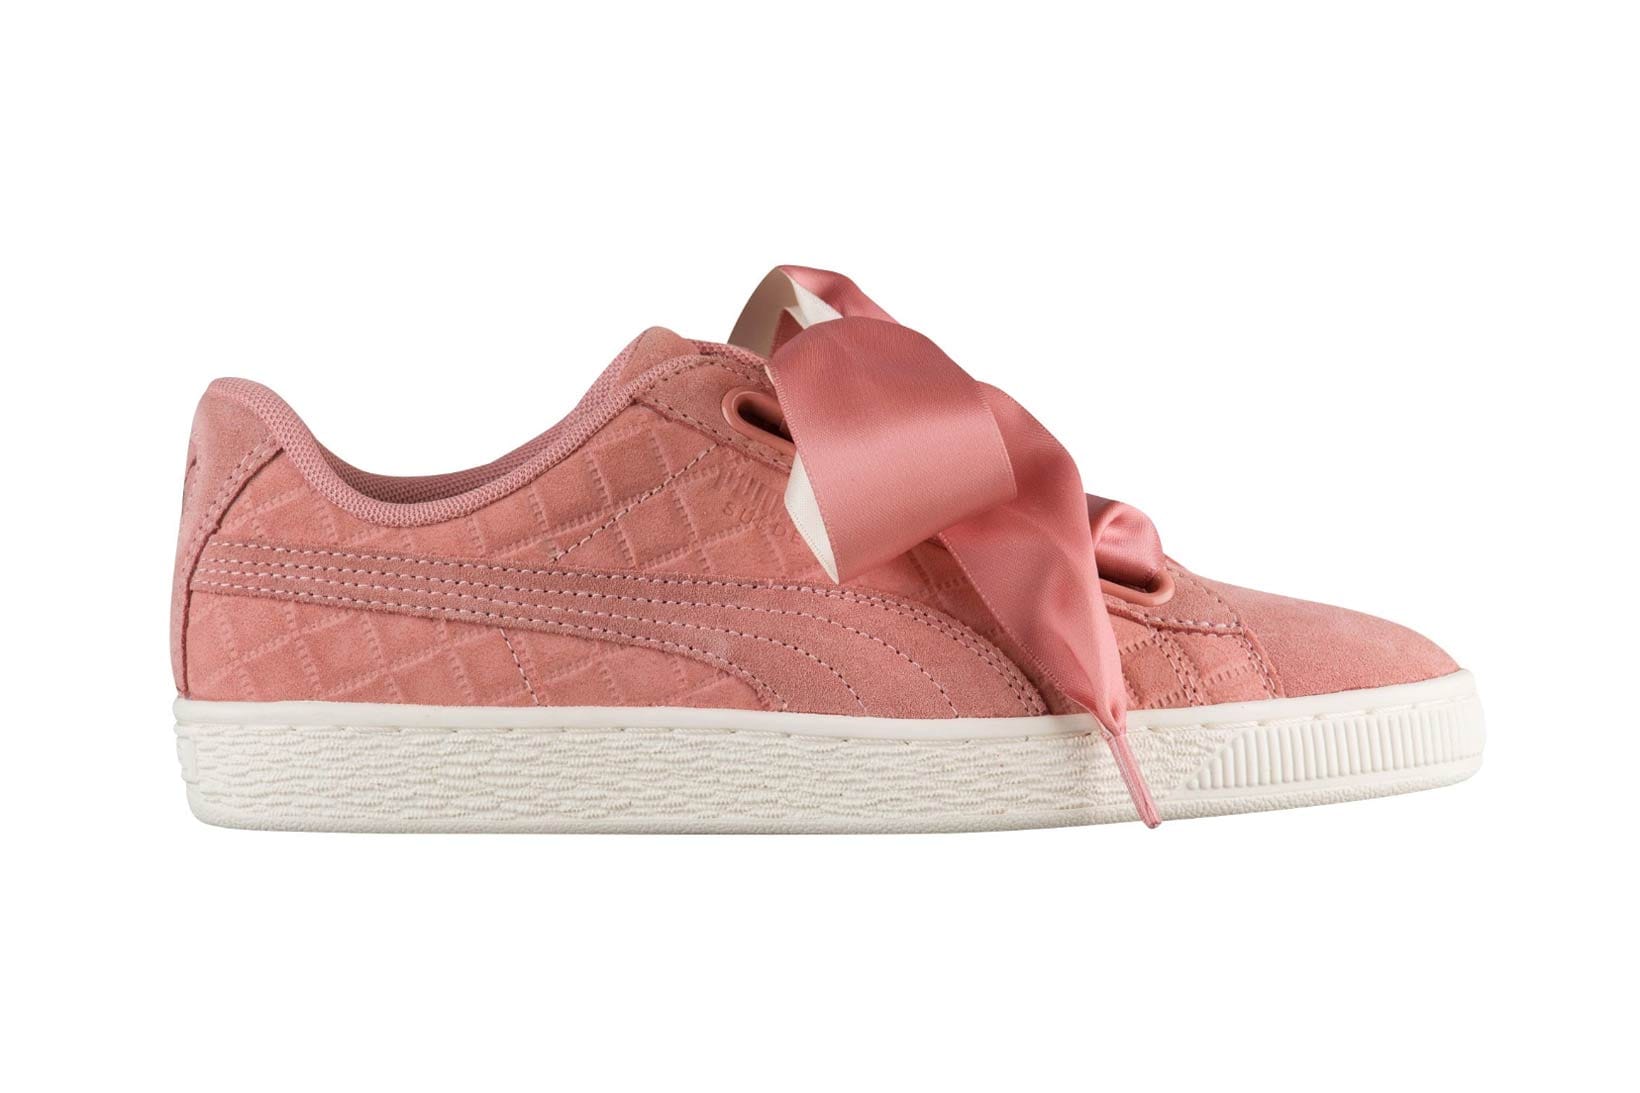 puma suede heart quilted